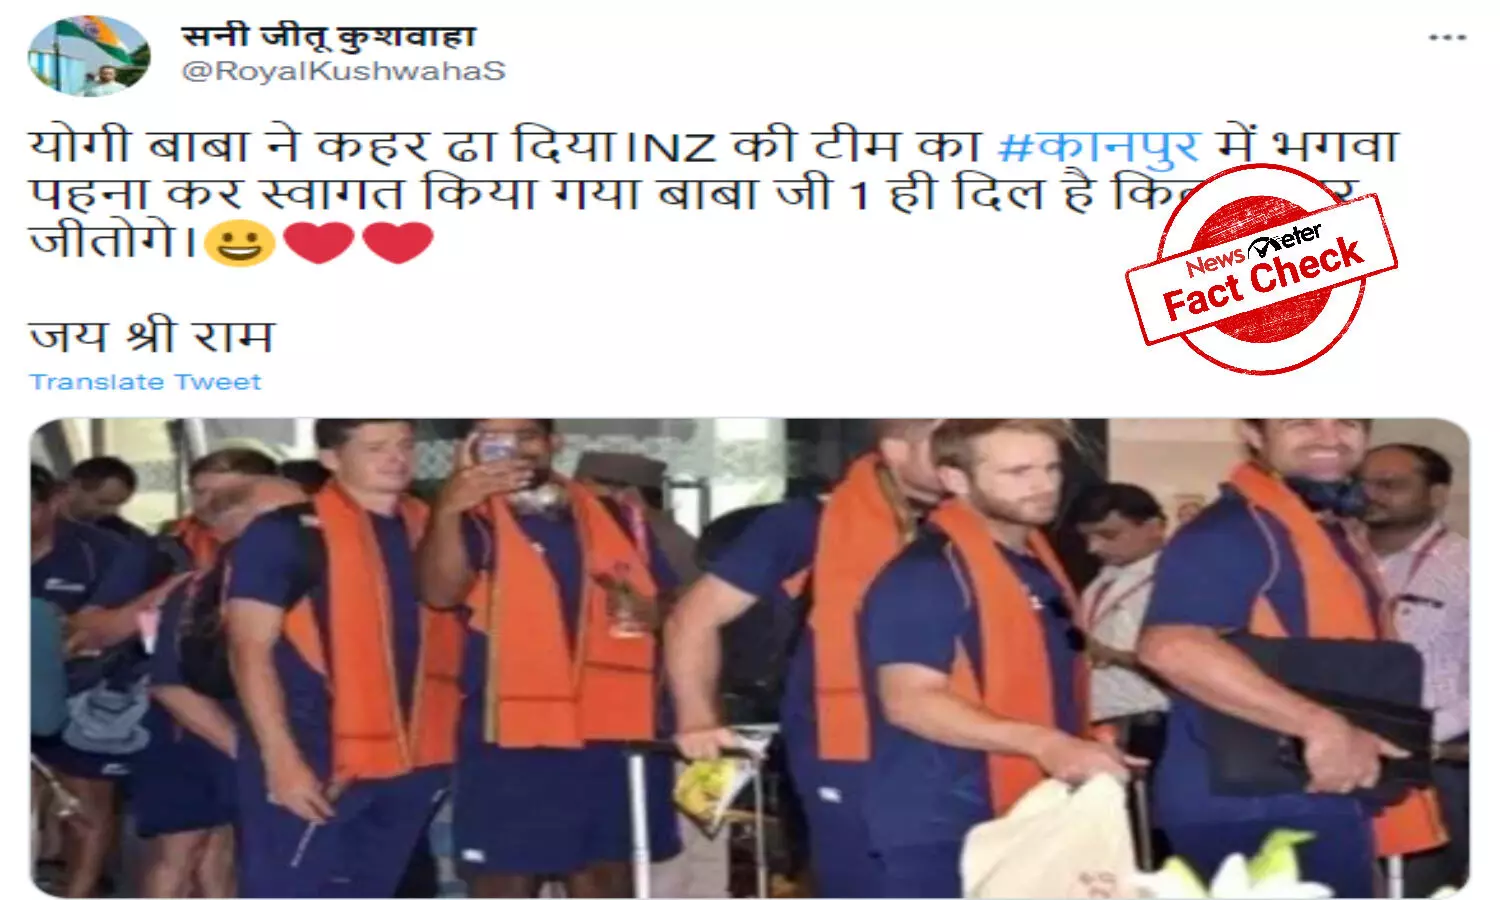 Fact Check: Old image of New Zealand players wearing `saffron gamcha shared as recent